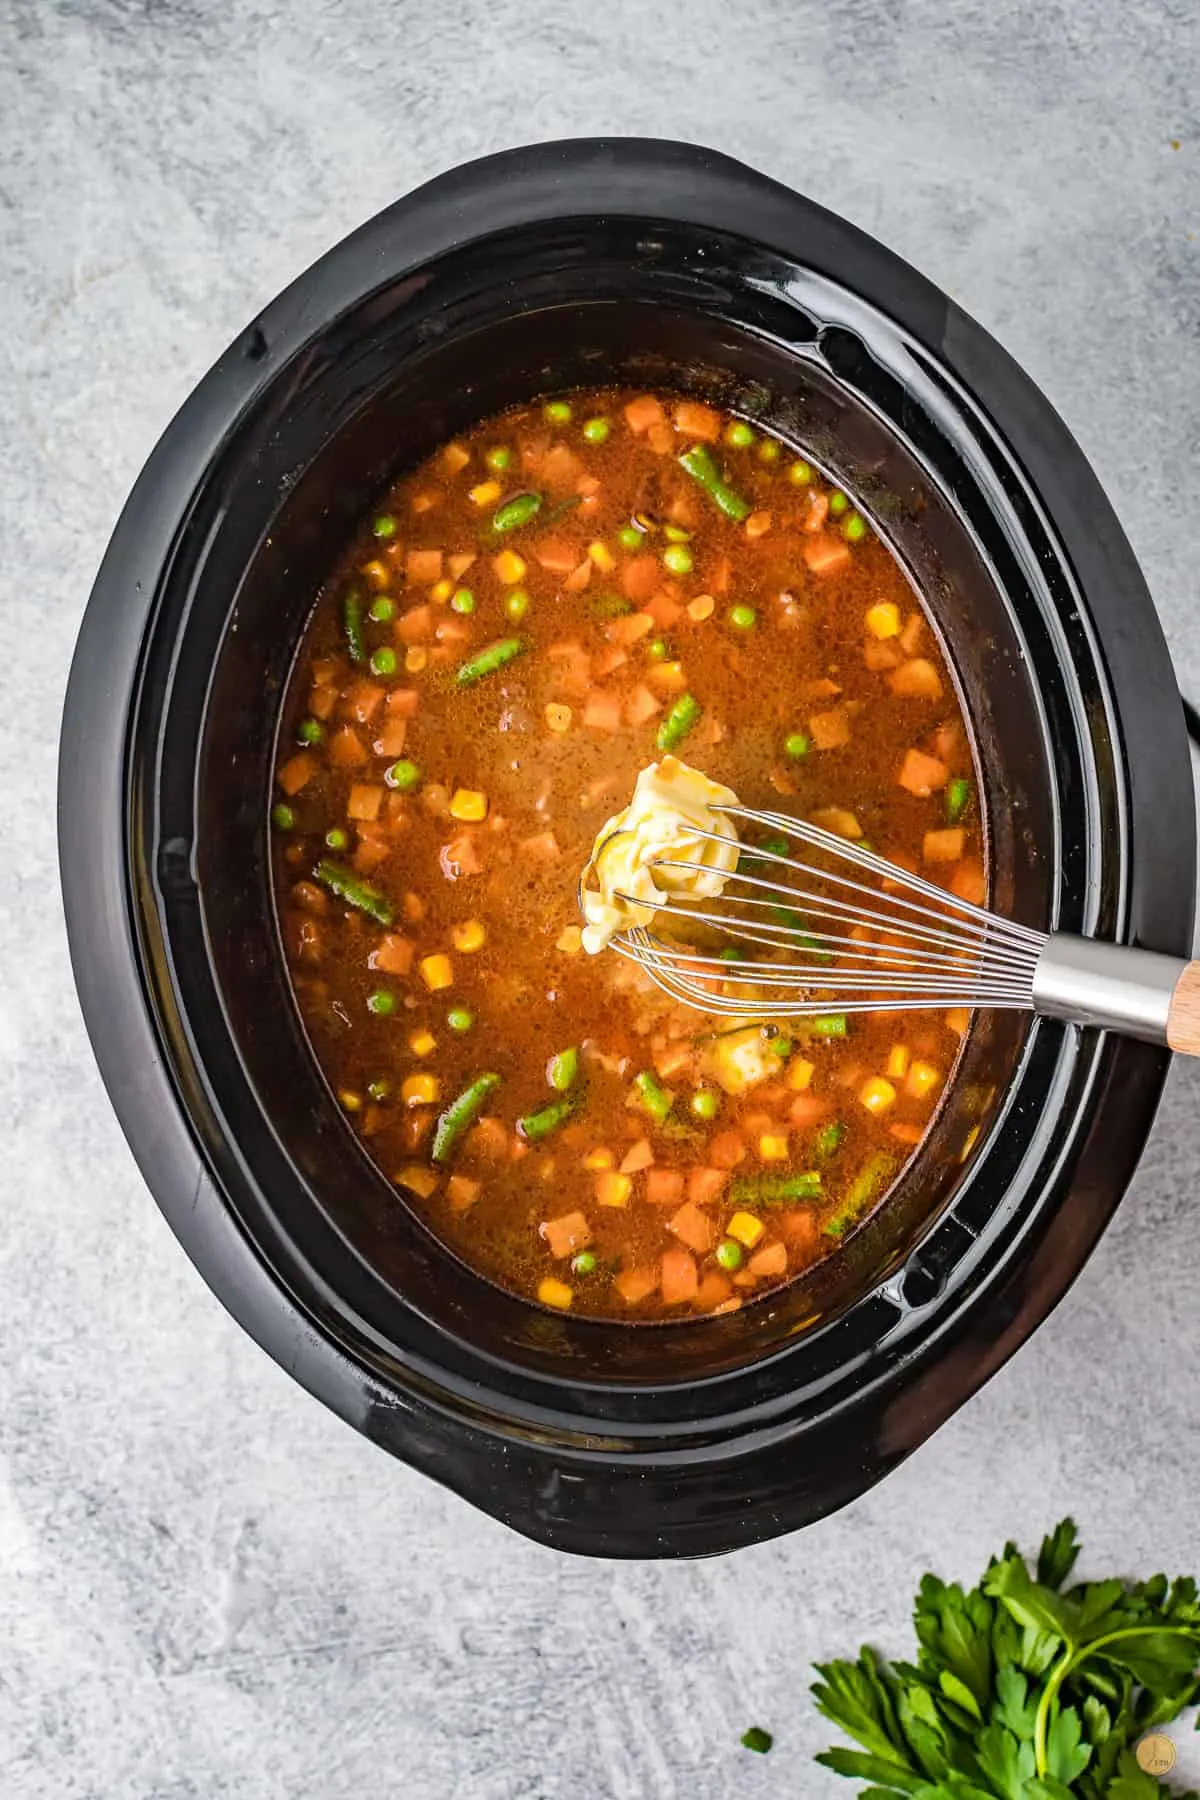 whisk and vegetables in a crock pot